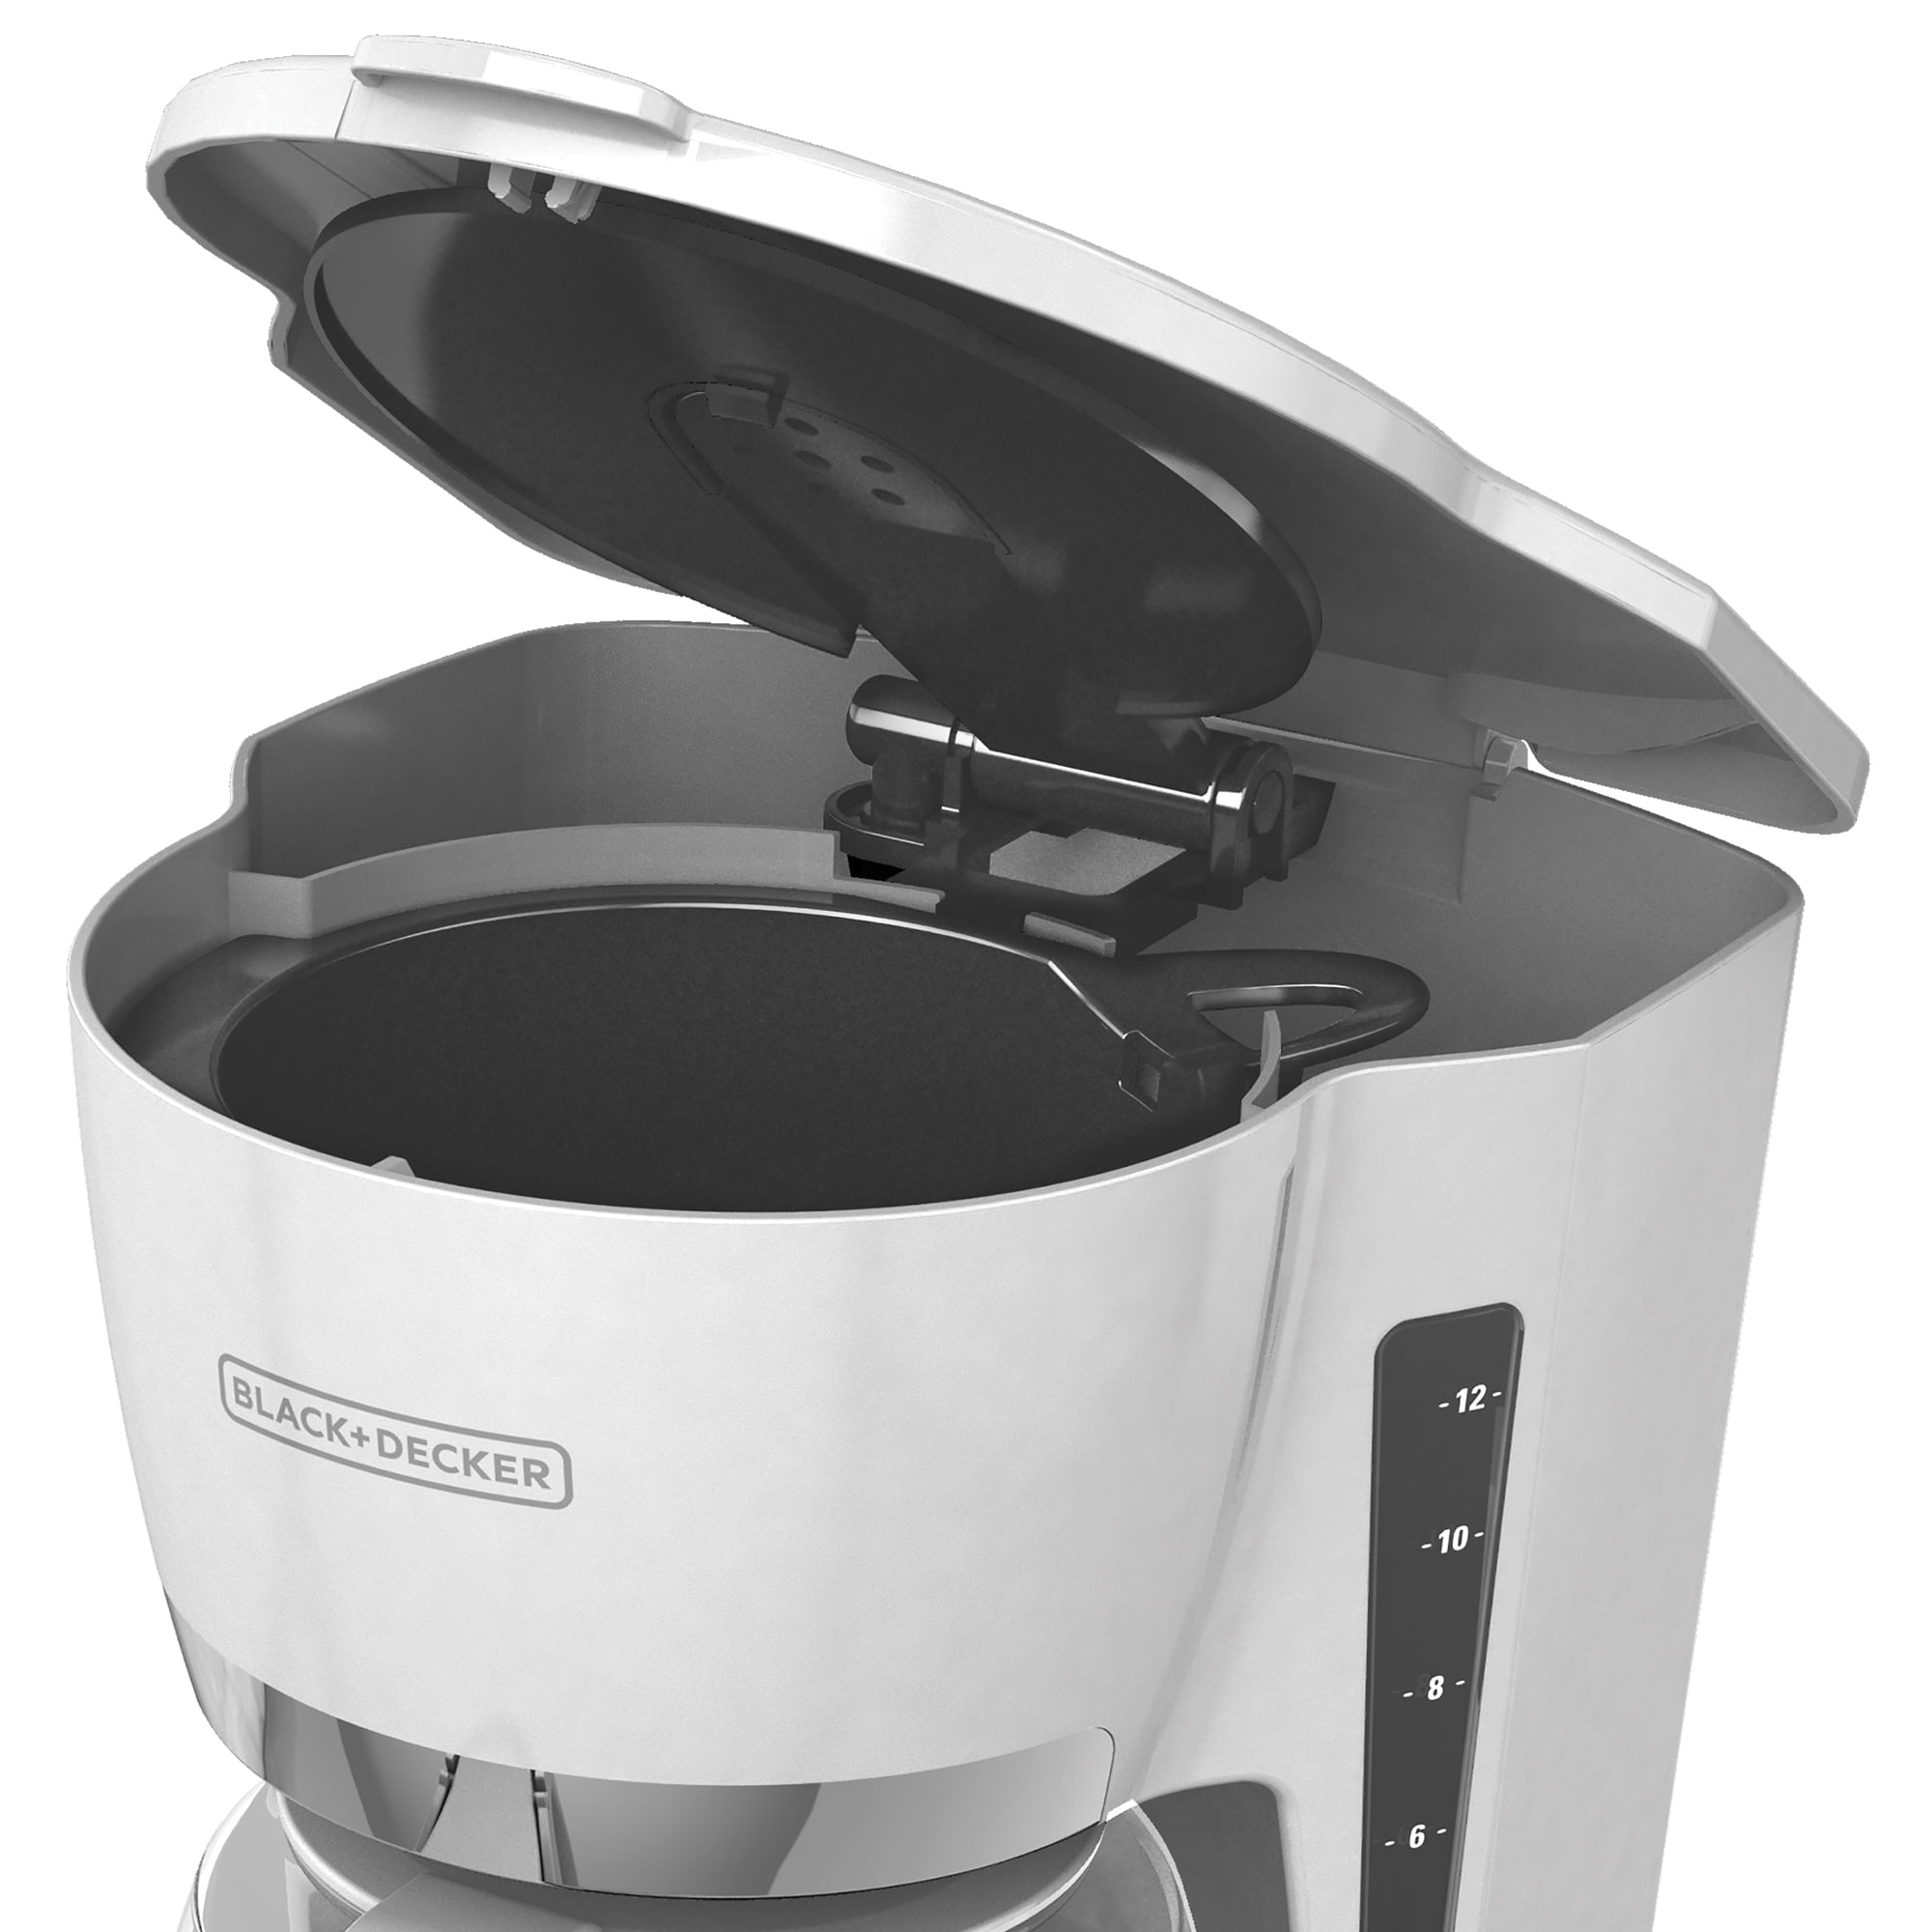 BLACK+DECKER QuickTouch™ Digital Programmable 12 Cup Review, Fast